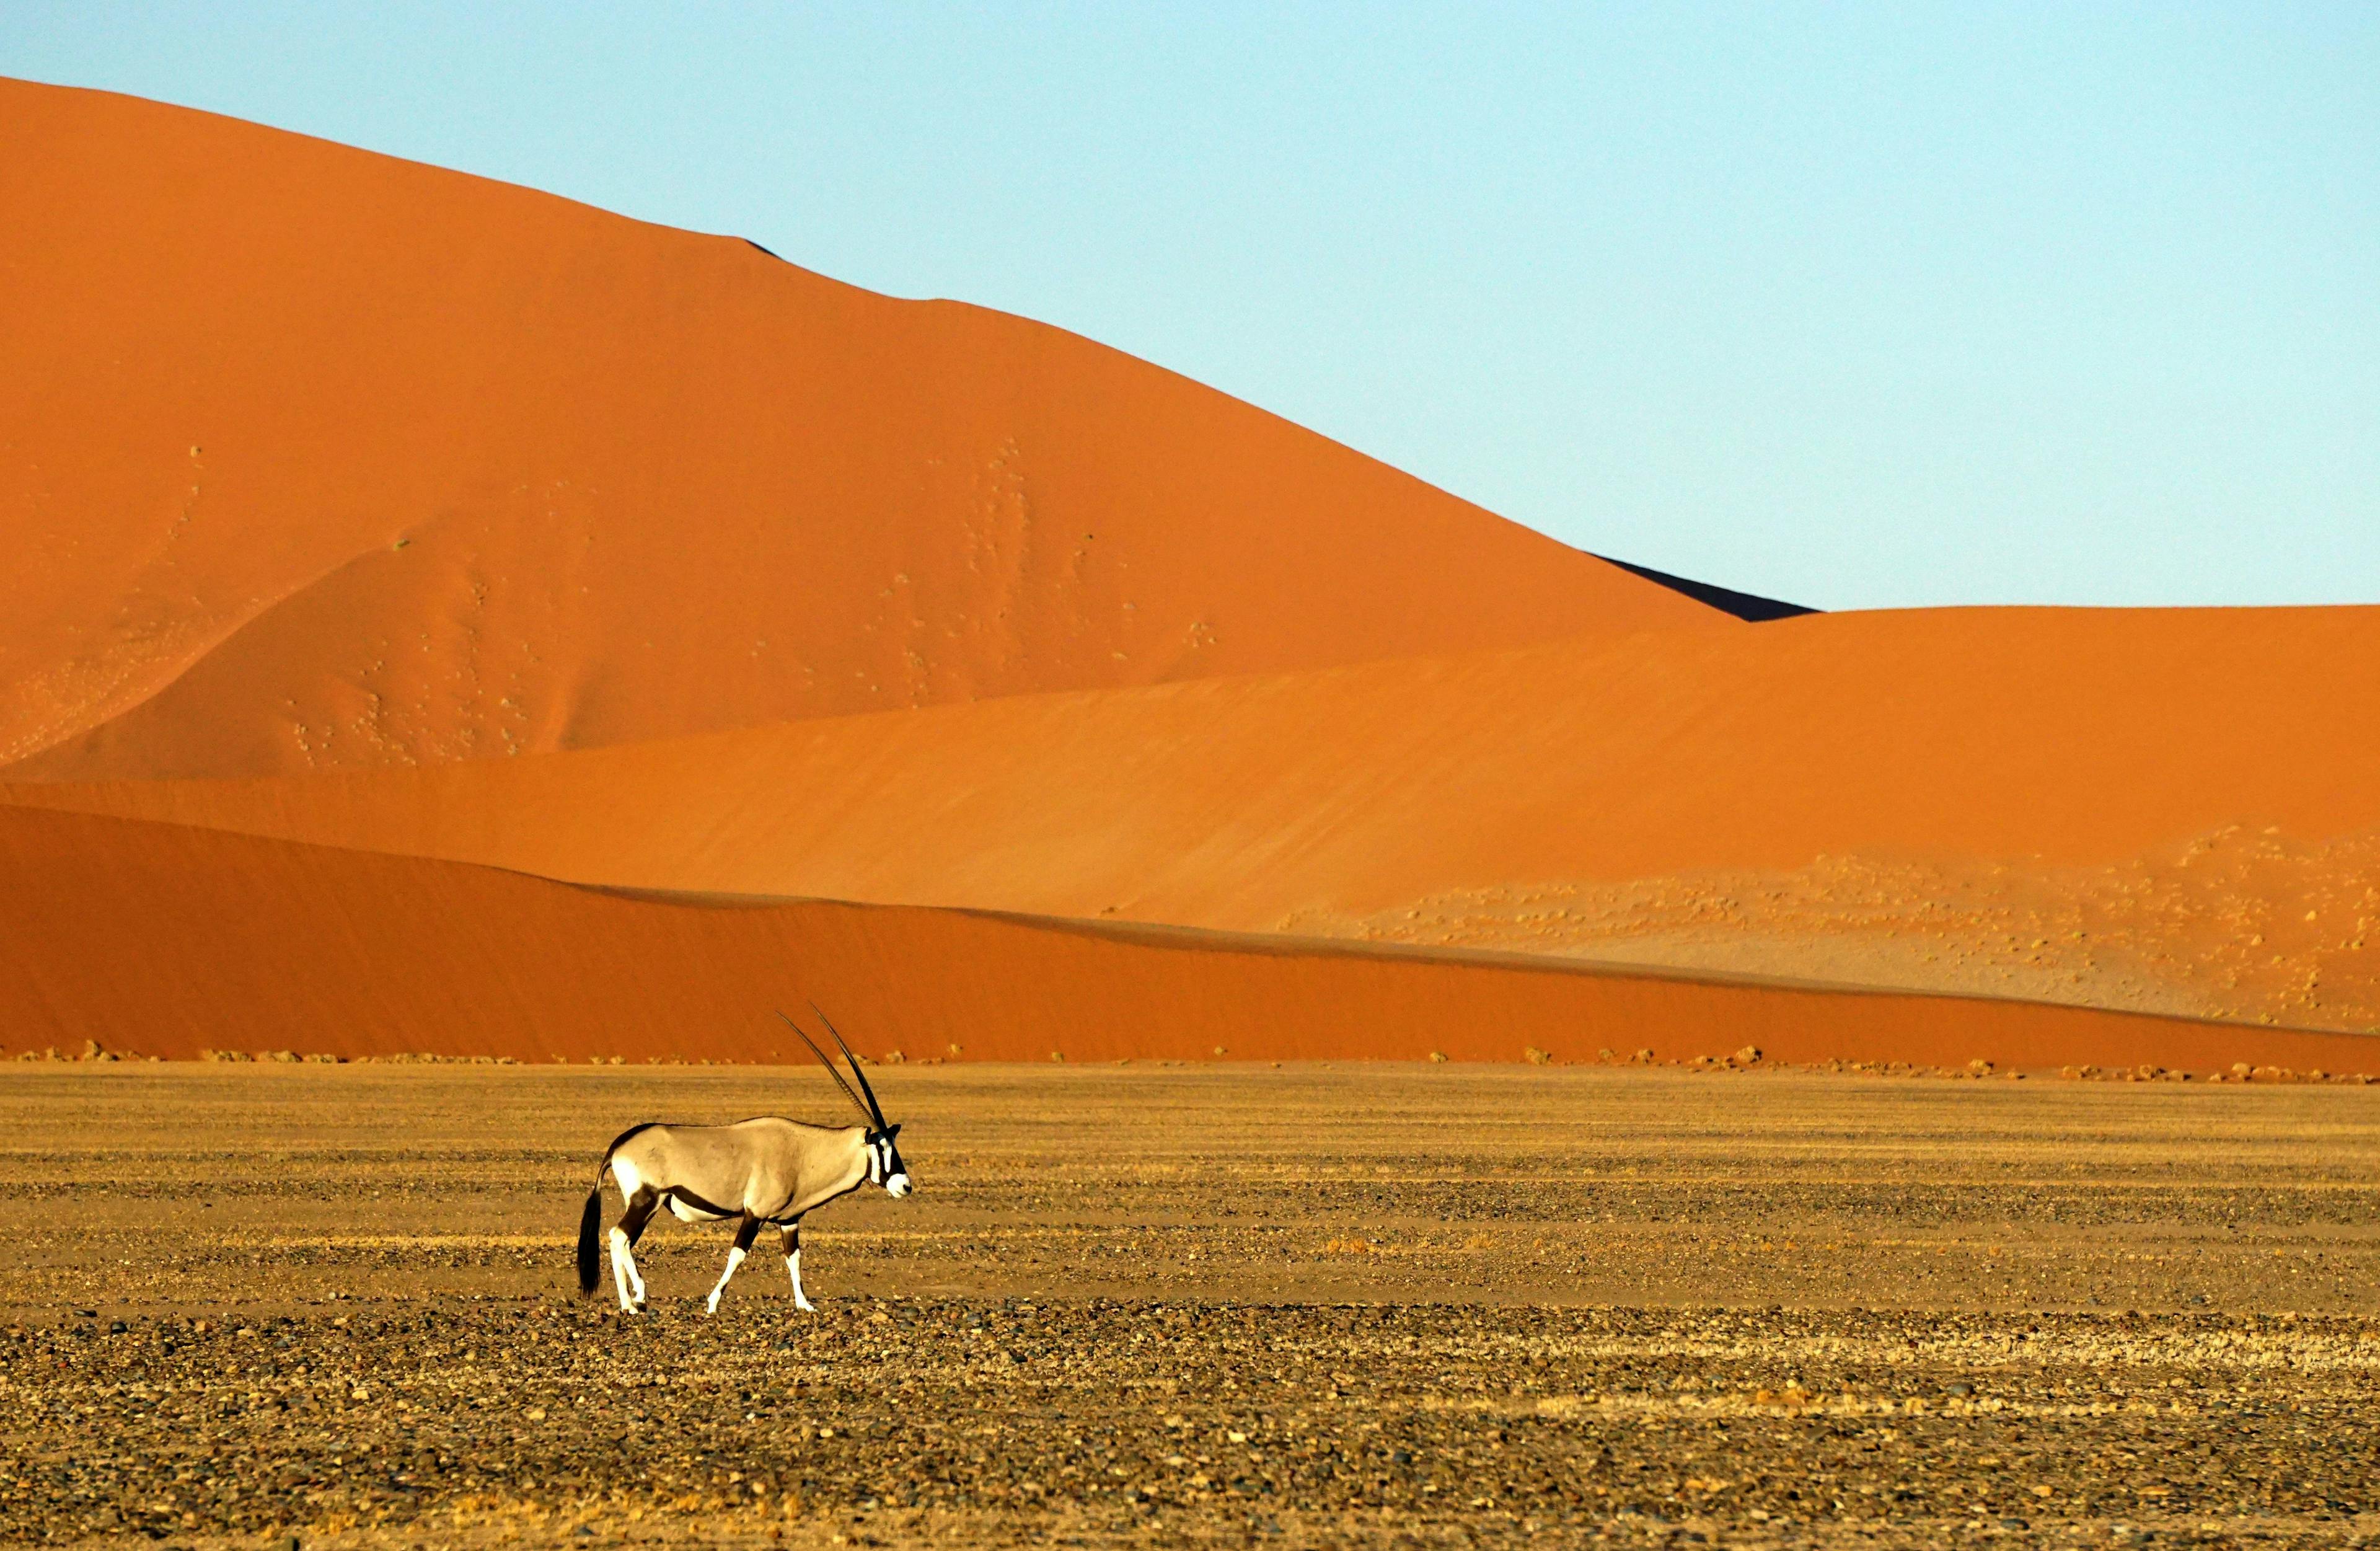 Oryx in Namib-Naukluft National Park in Namibia.